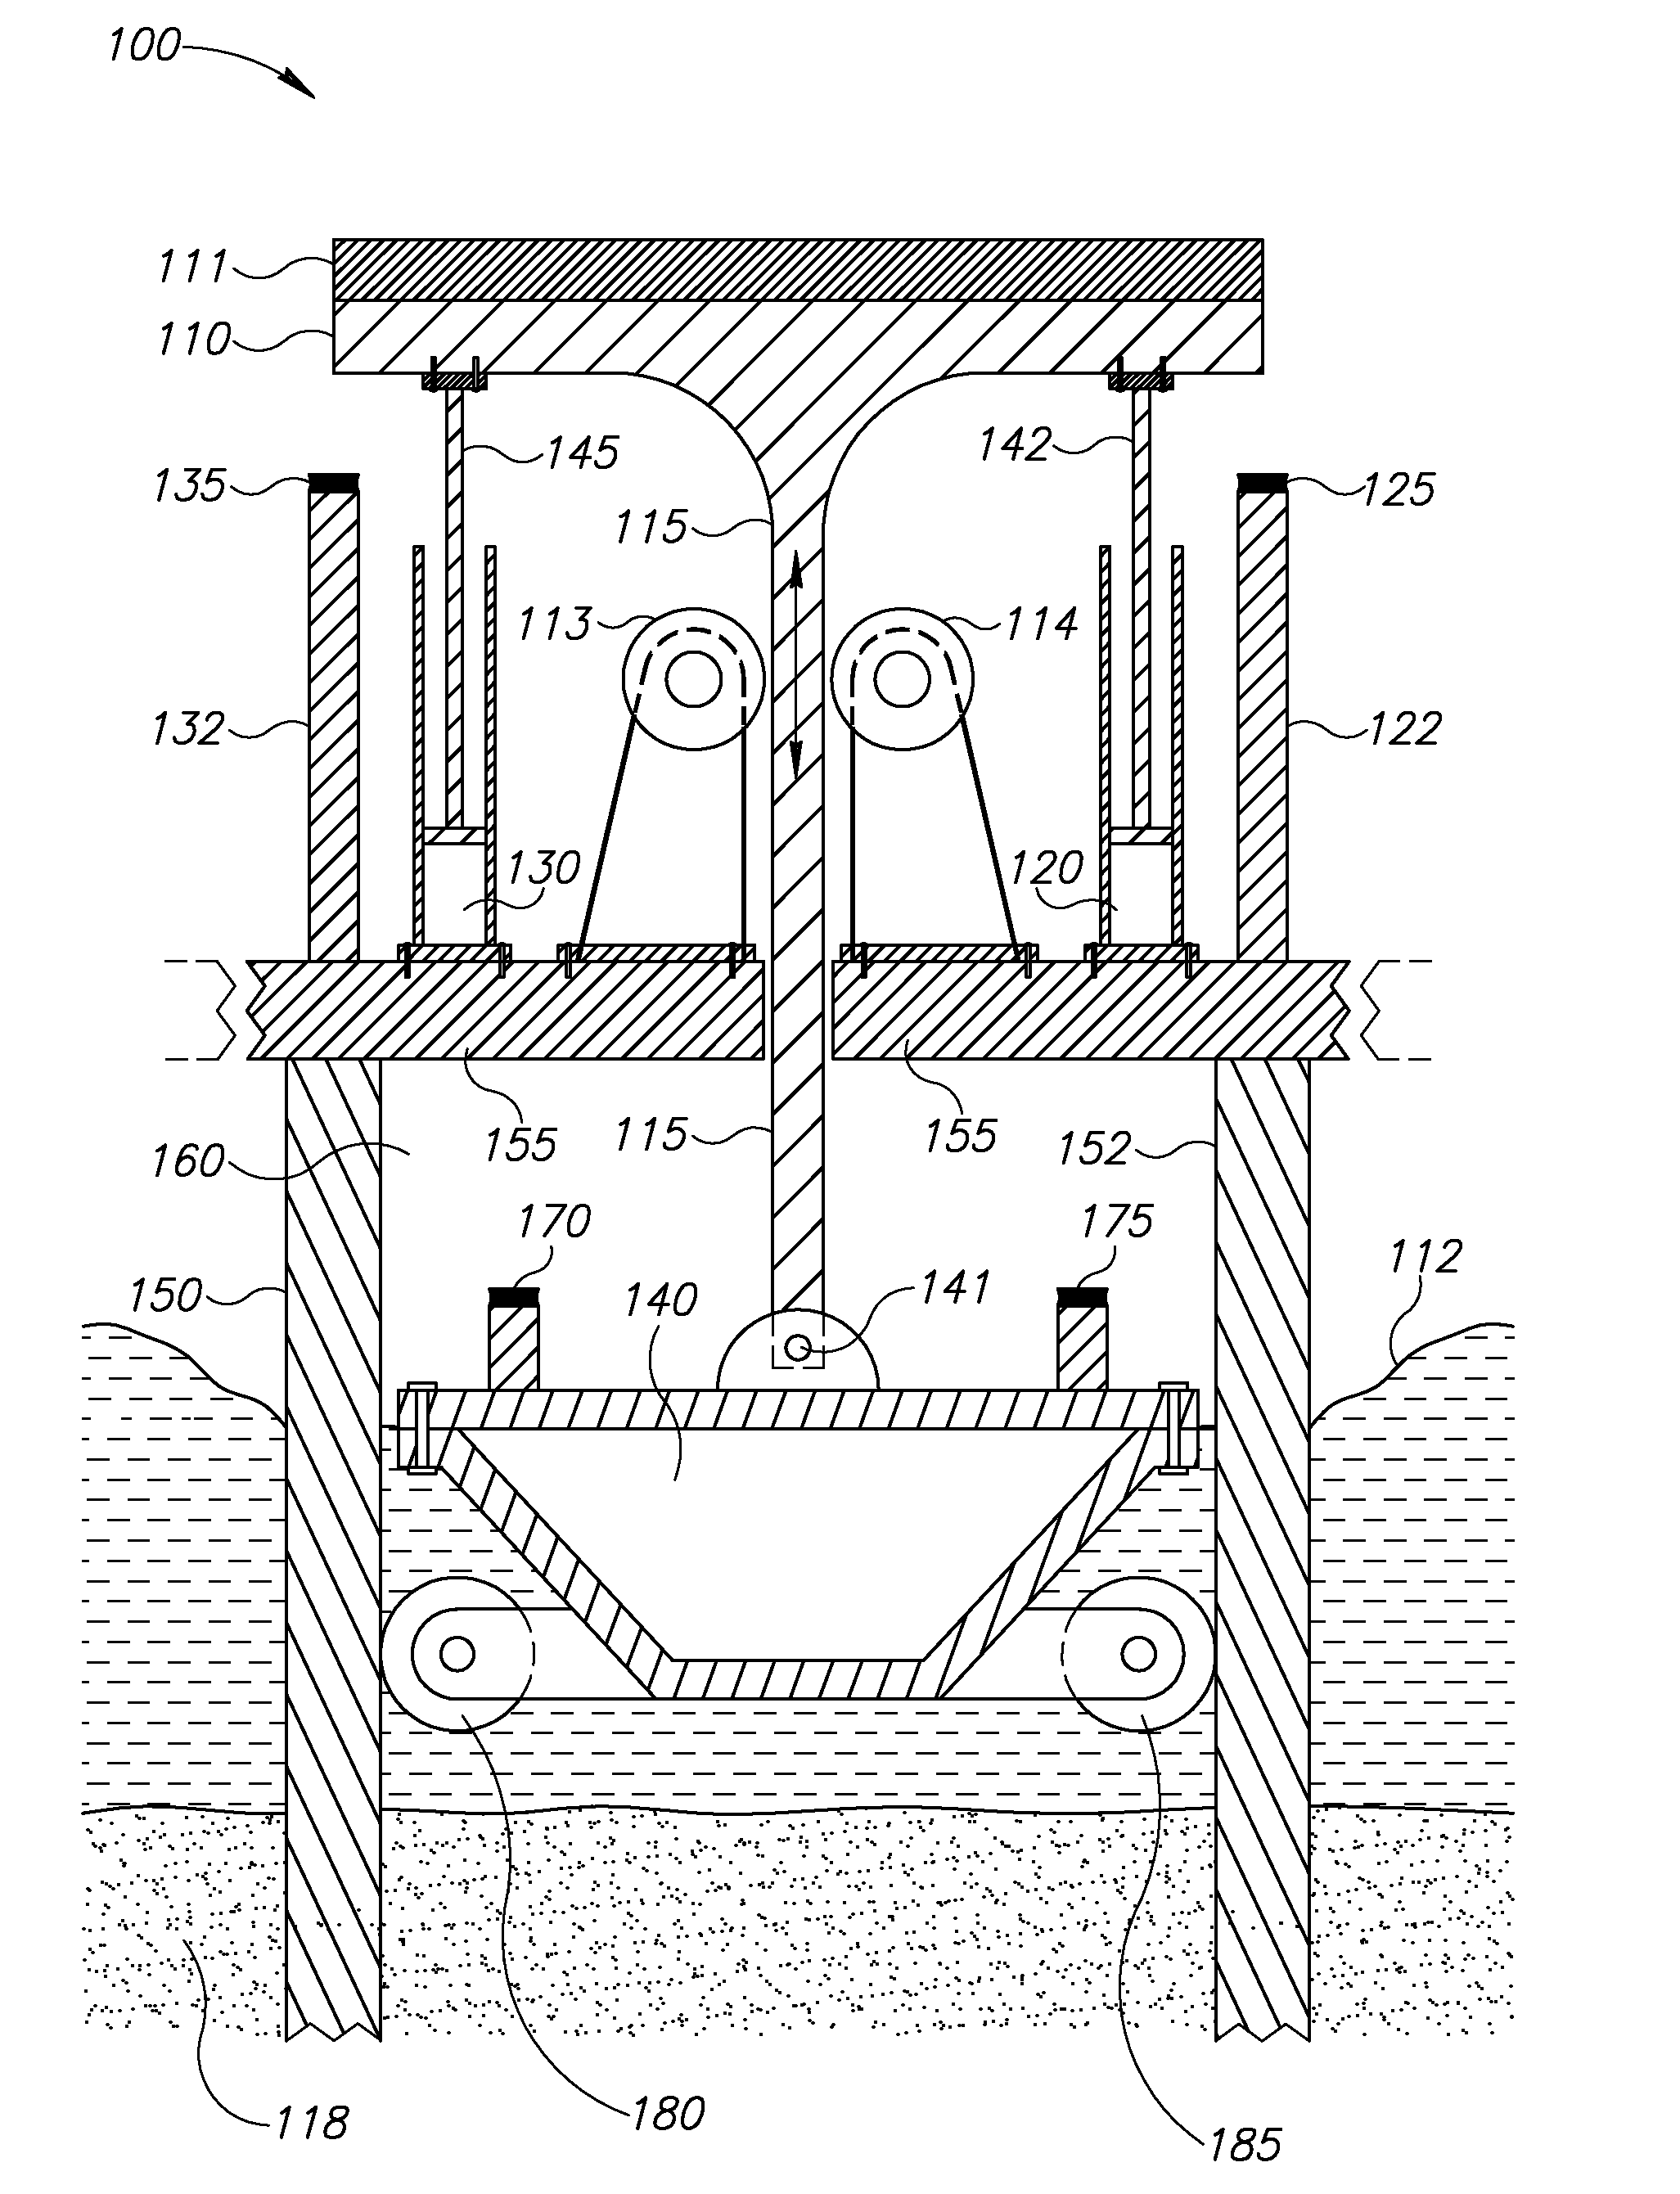 System and method for producing electrical power from waves